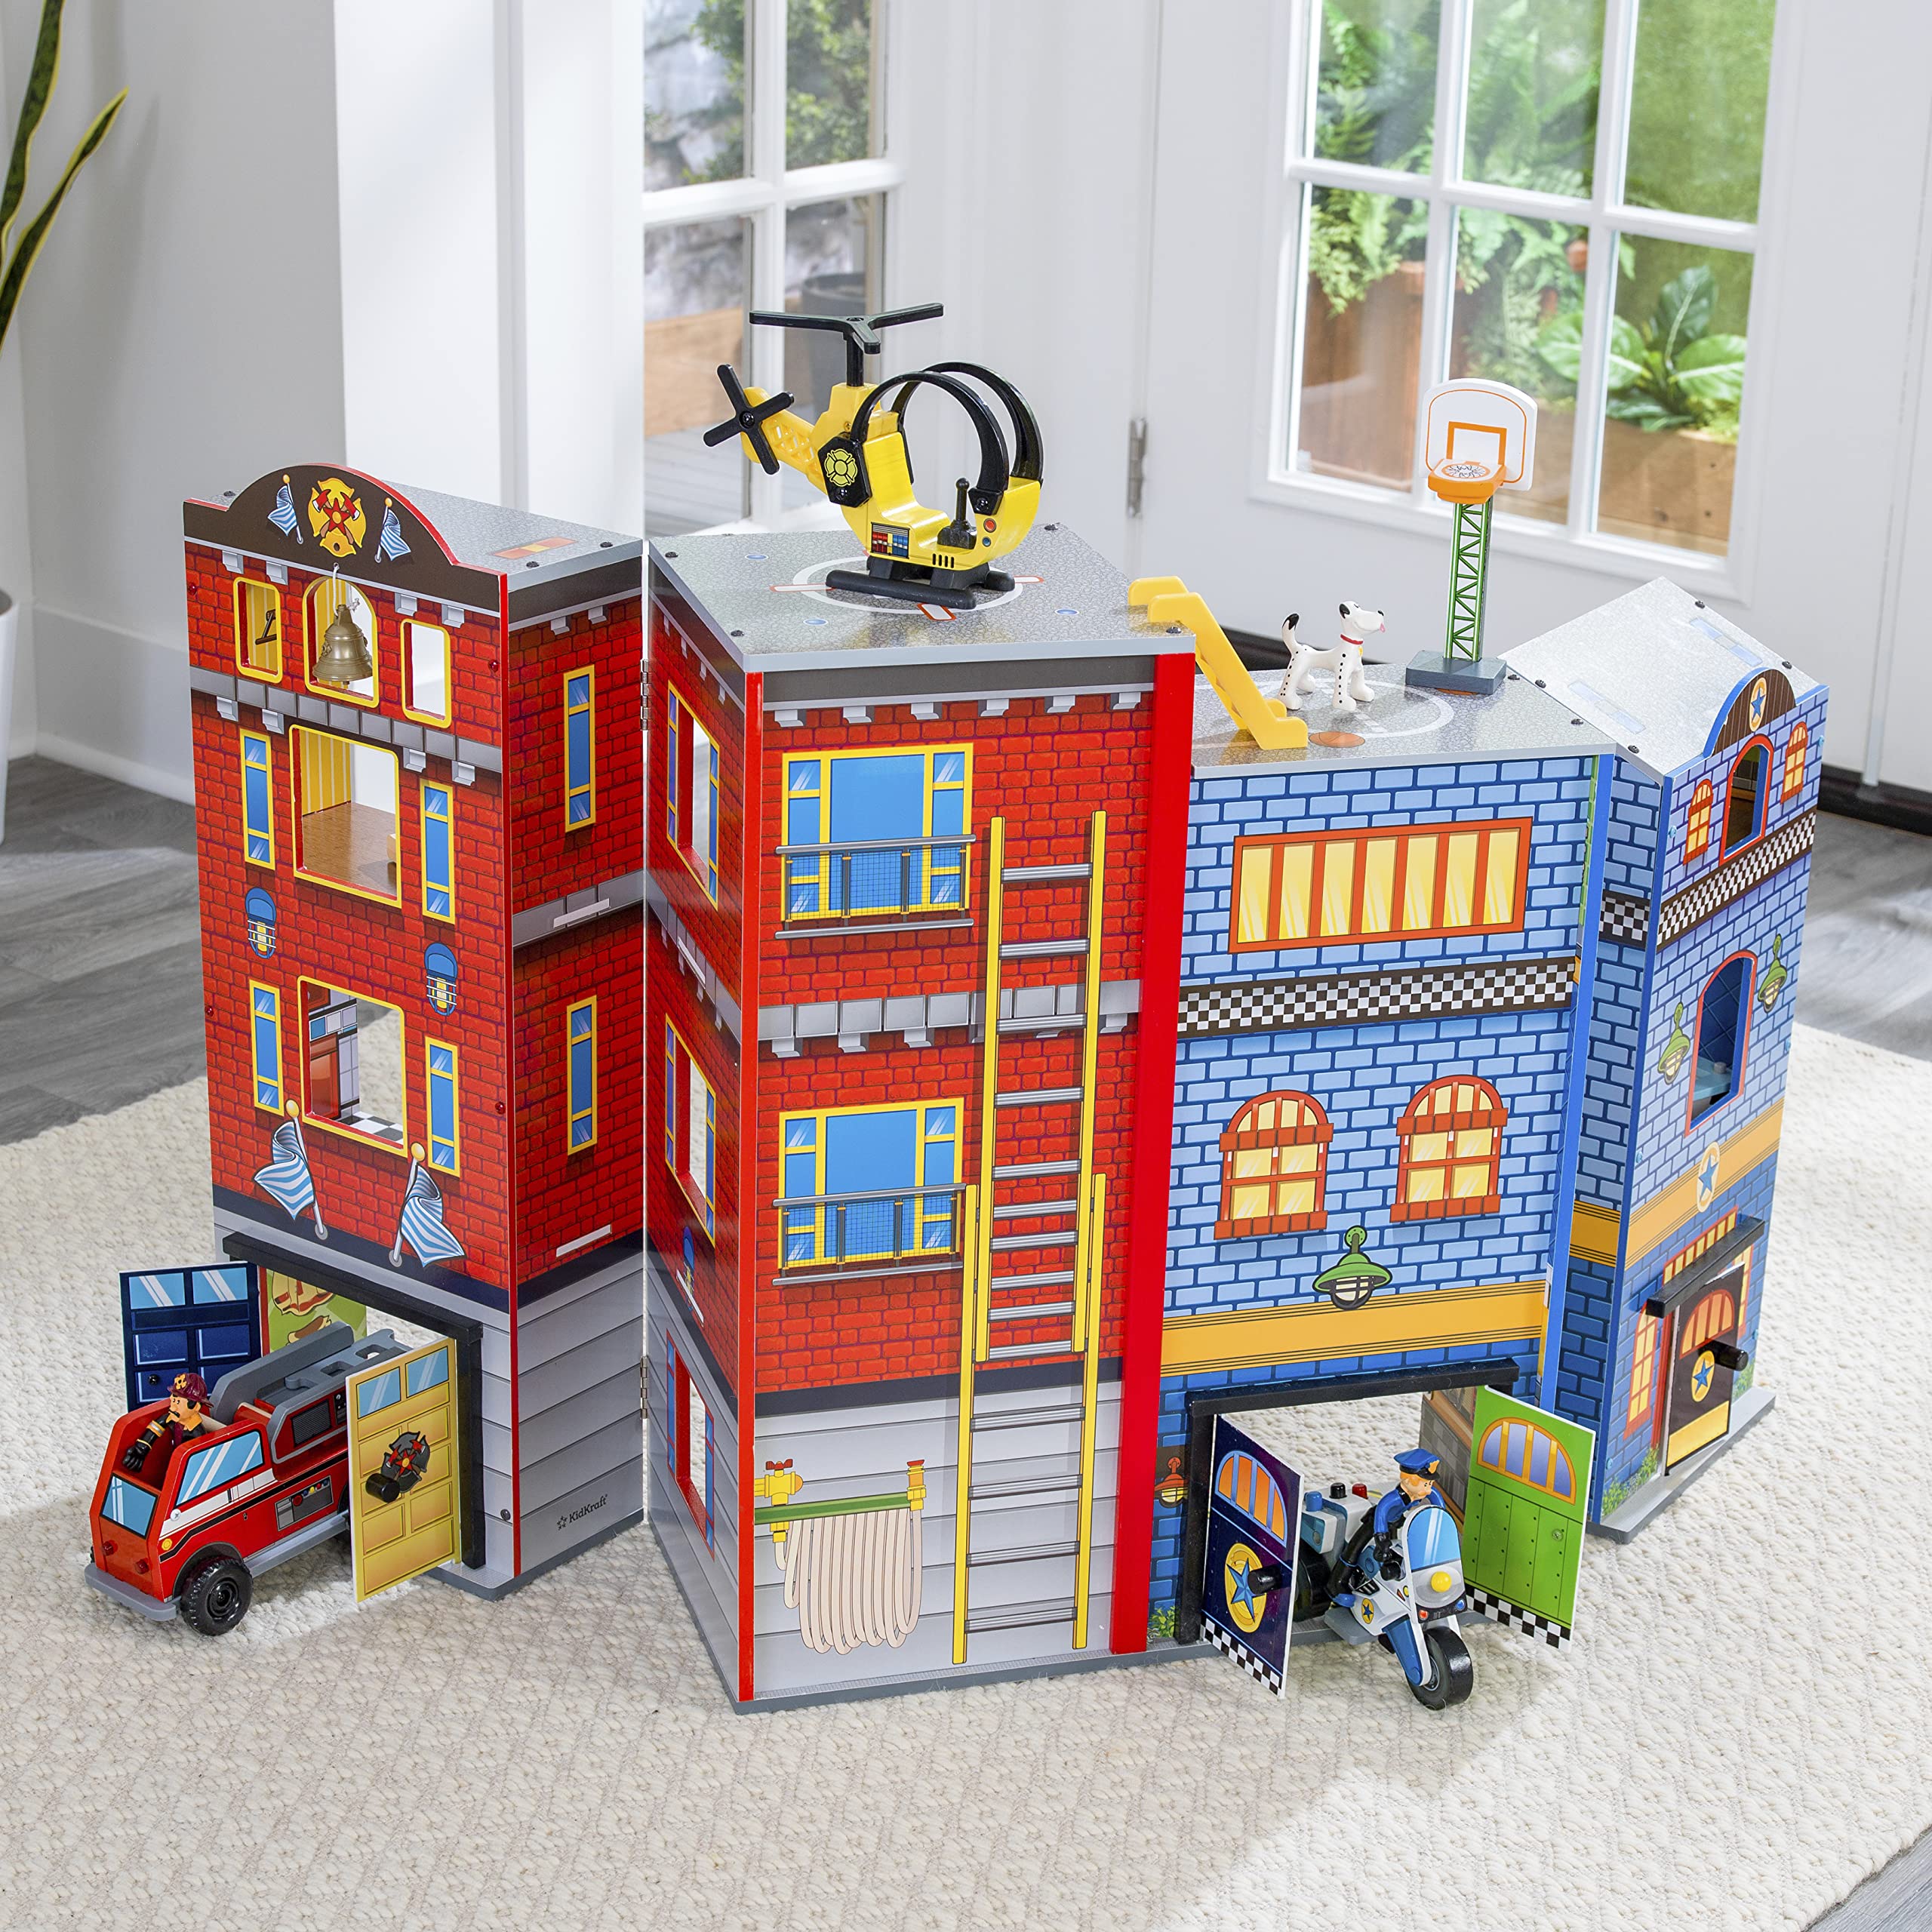 KidKraft Everyday Heroes Wooden Playset, 3-Story with 26-Piece Accessories, Foldable for Storage